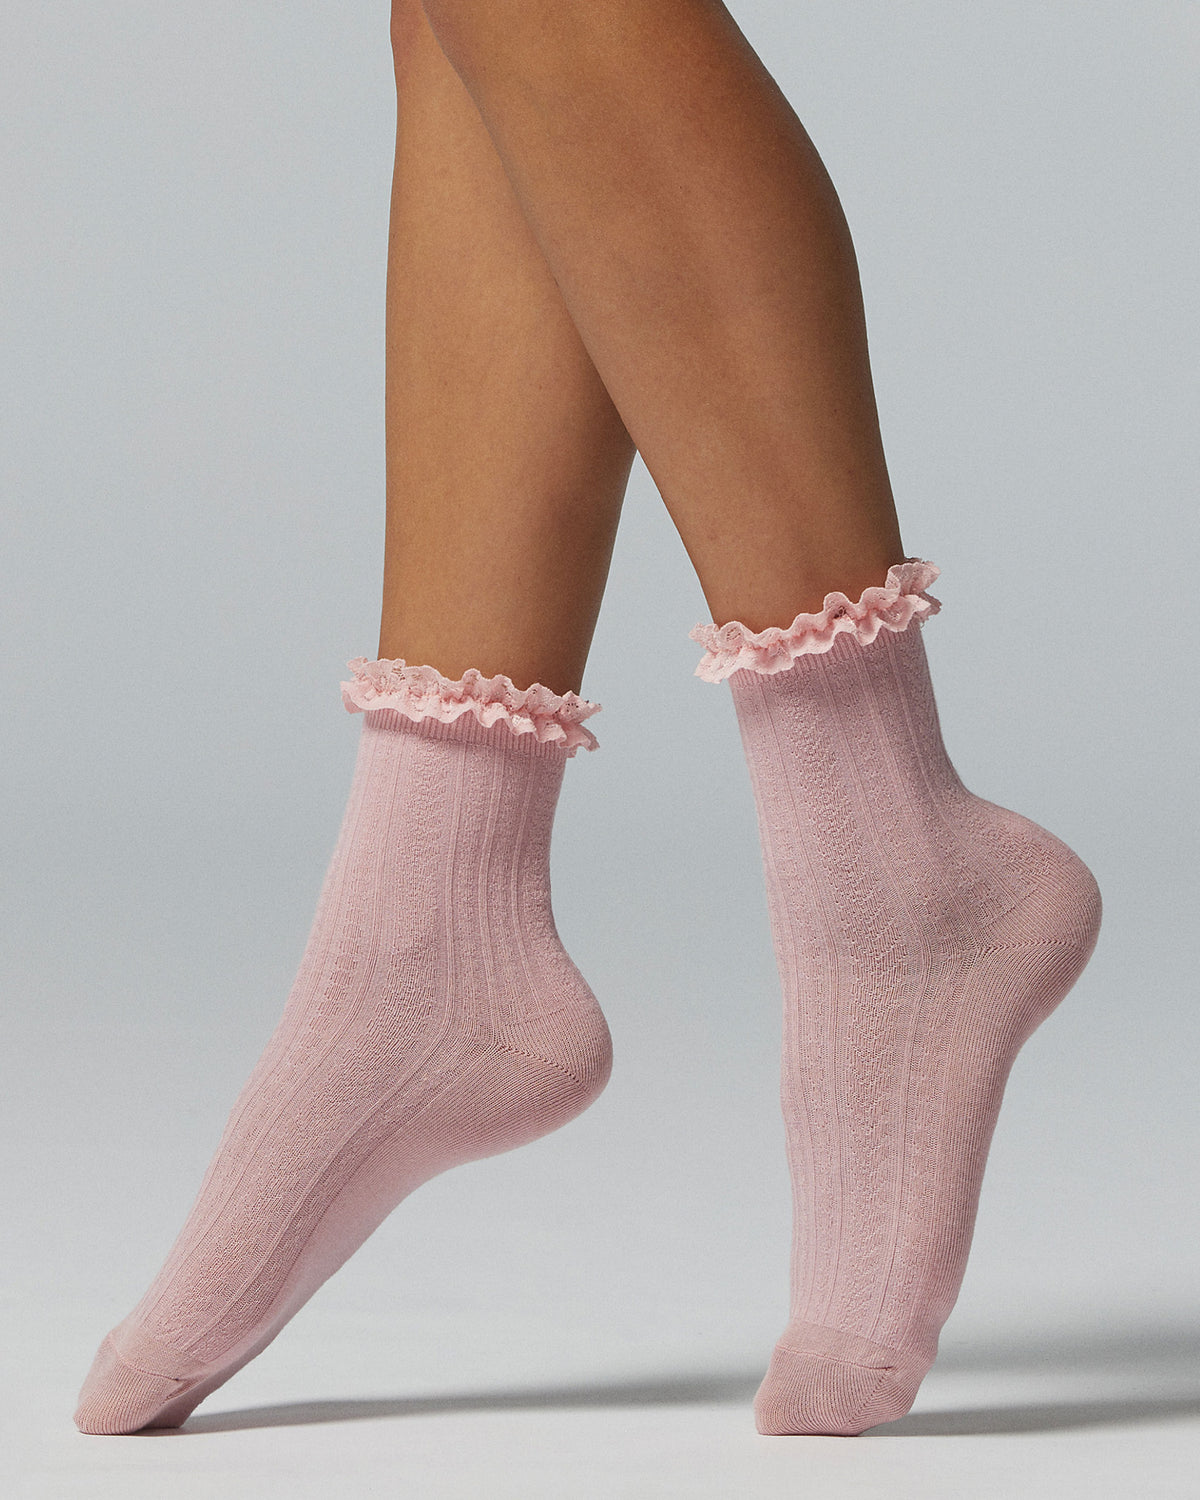 Rodia textured sock with ruffles at the edge